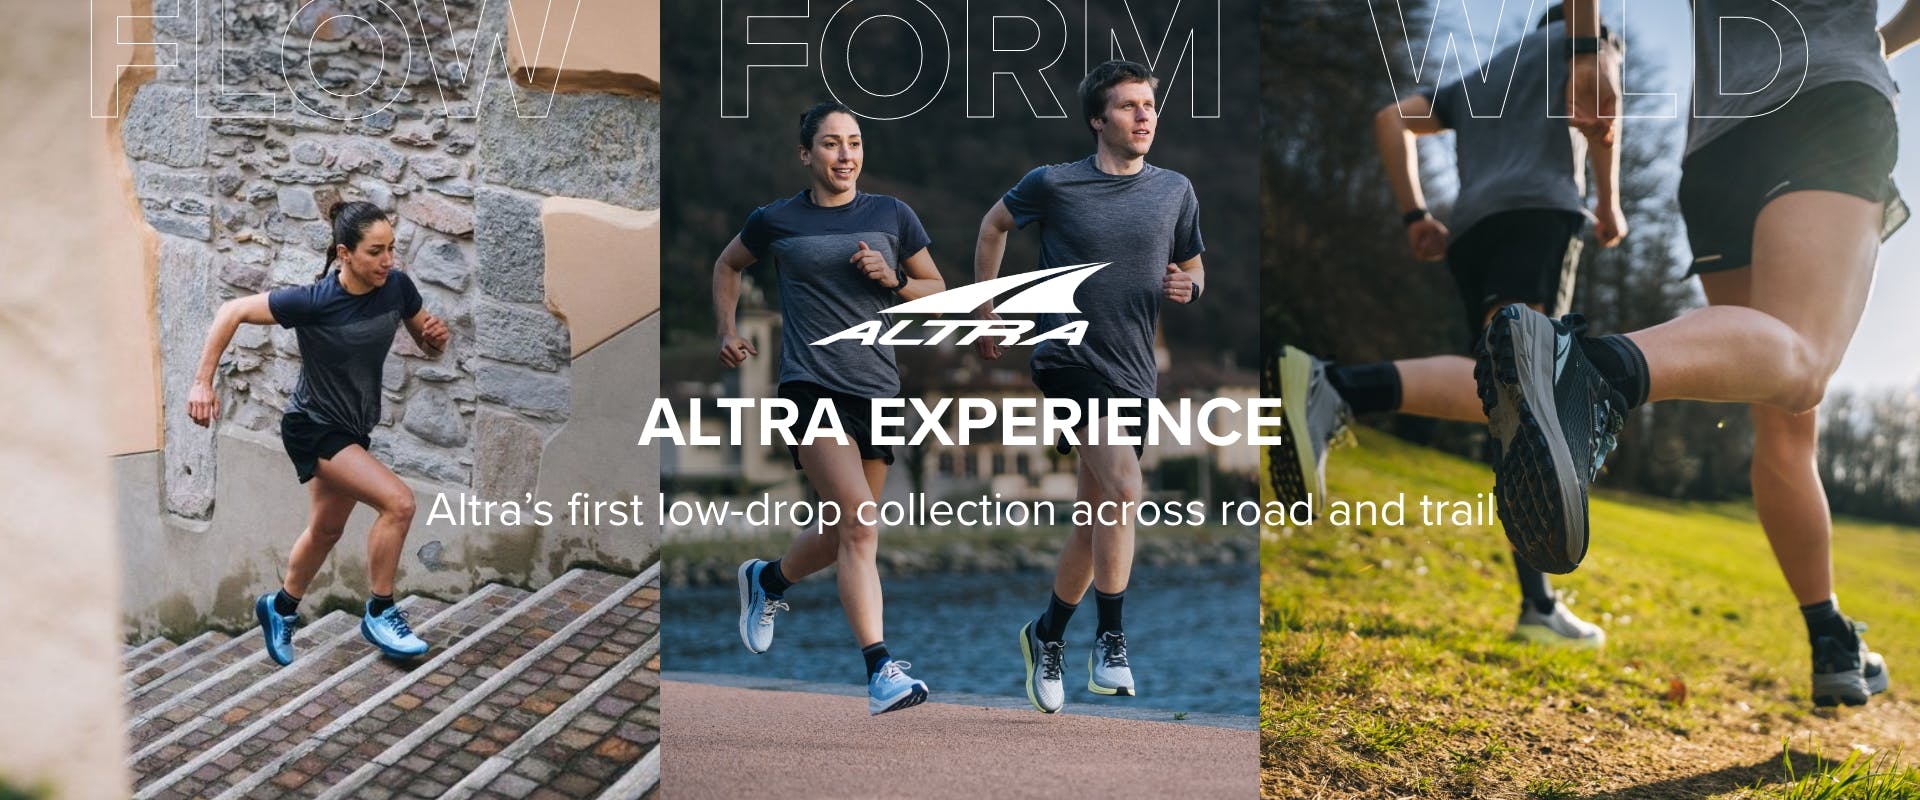 Altra Experience